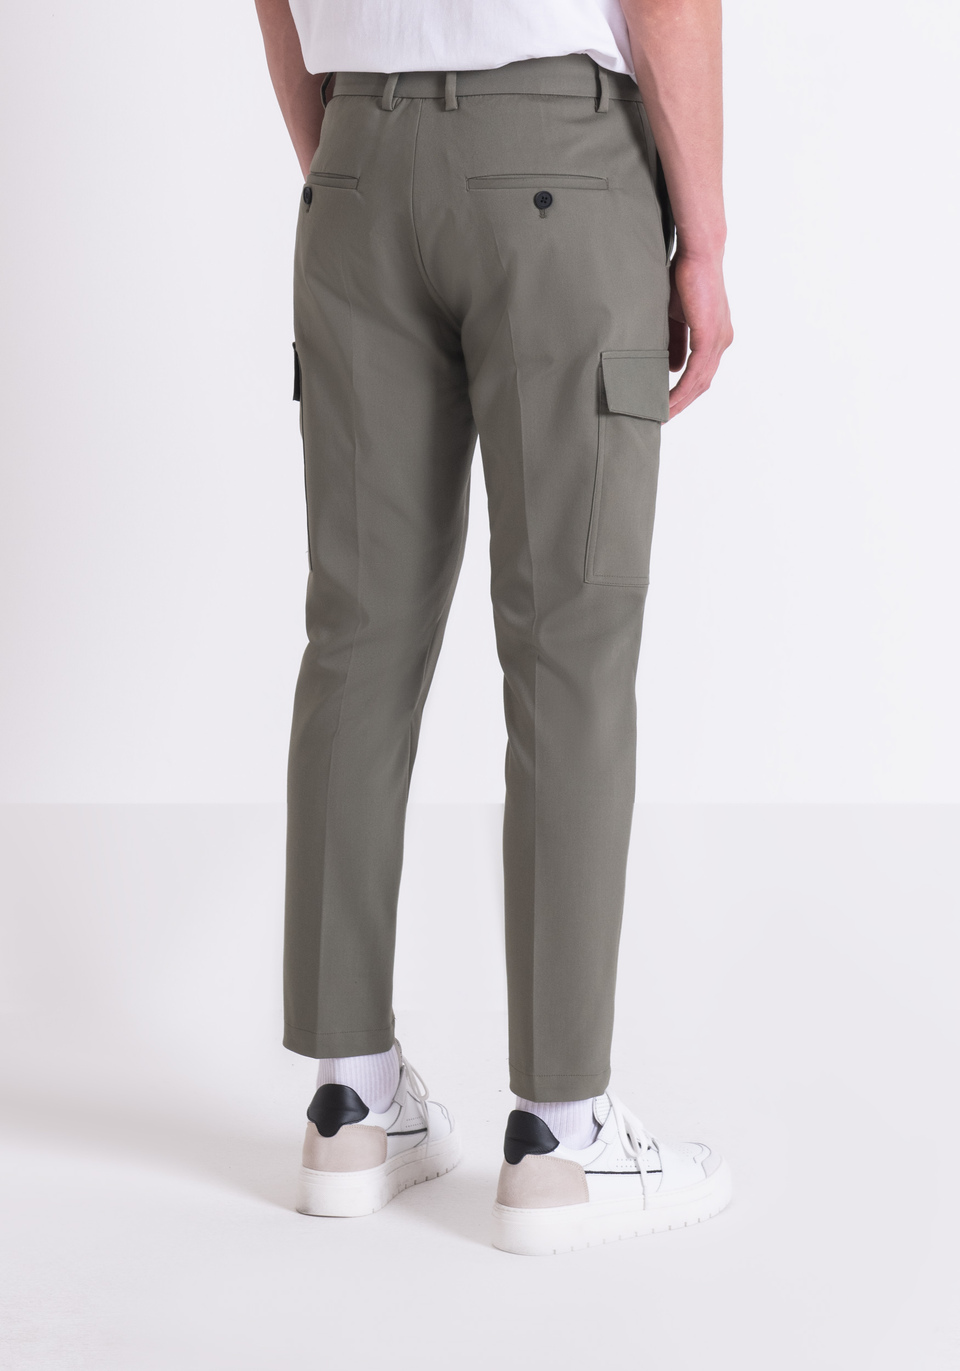 "BJORN" SKINNY FIT TROUSERS IN ELASTIC COTTON BLEND FABRIC - Antony Morato Online Shop